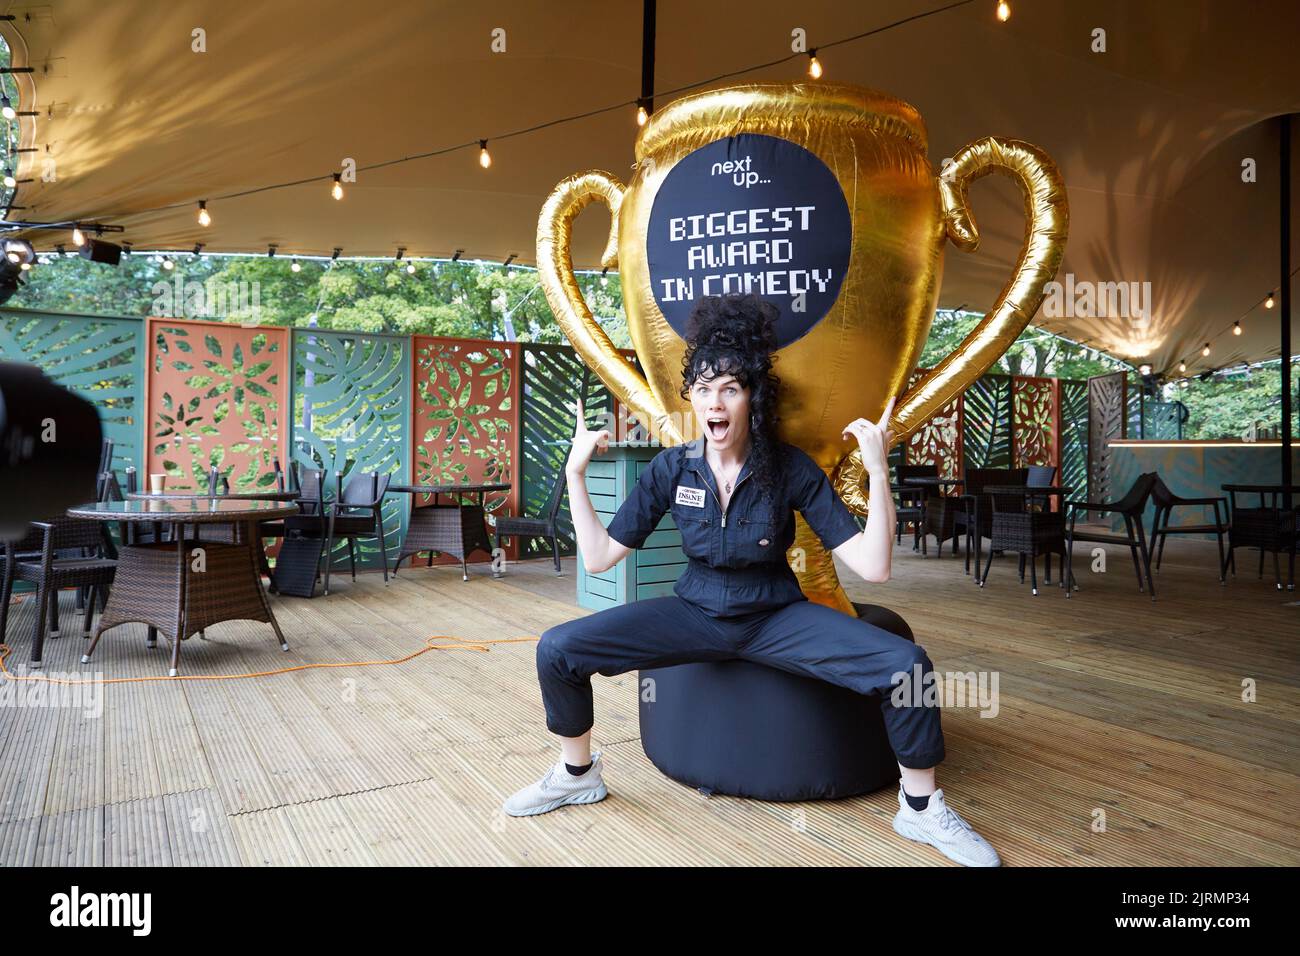 Edinburgh, UK. 25th Aug, 2022. Jordan Gray (pictured) wins NextUp's ‘Biggest Award in Comedy' at the Edinburgh Festival Fringe for her show 'Is it a Bird'. A giant two metre inflateable trophy was Awarded to Jordan by NextUp. Credit: Brian Wilson/Alamy Live News Stock Photo